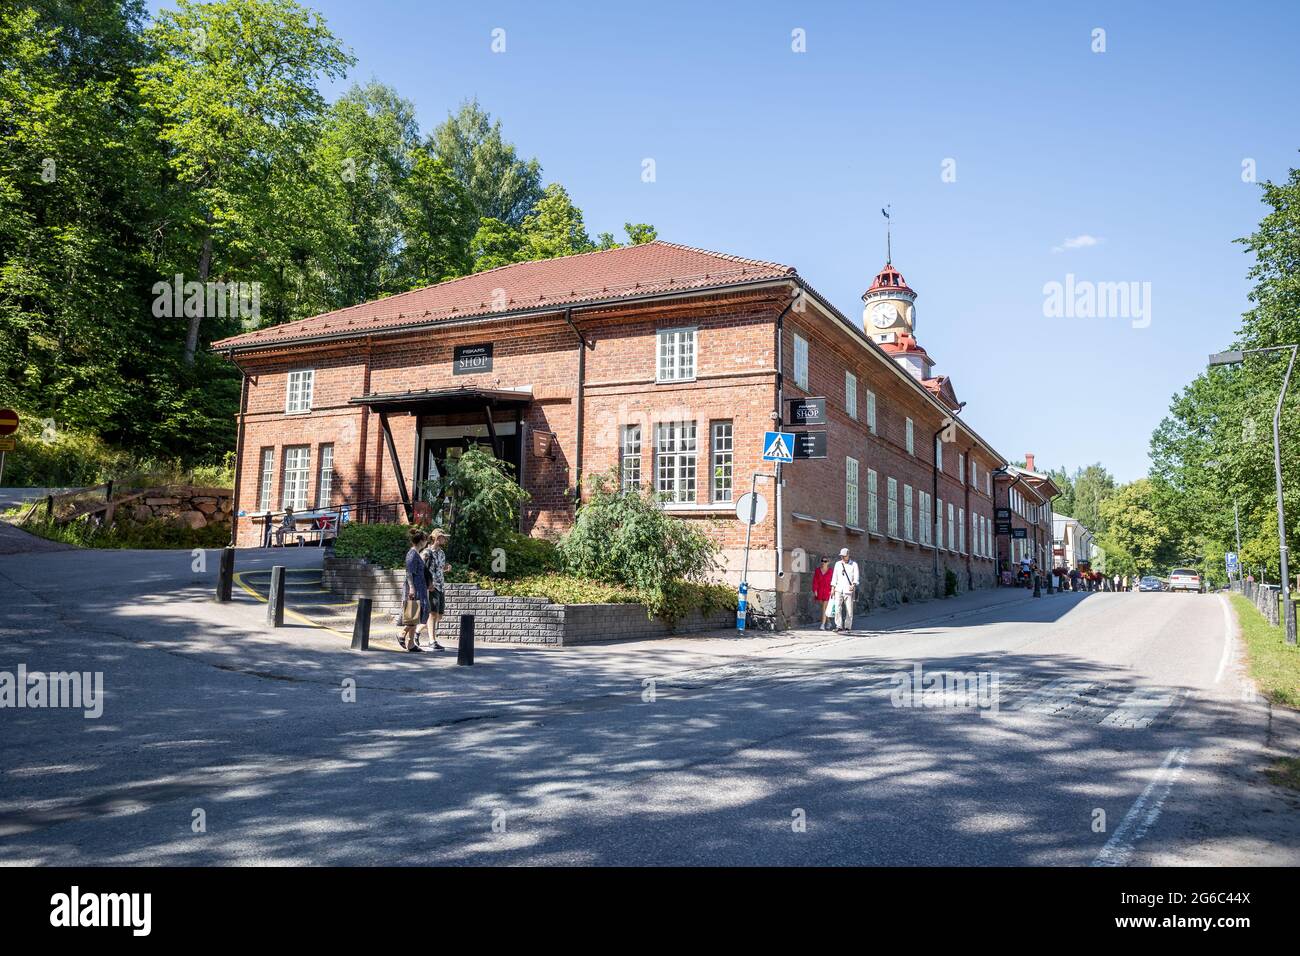 https://c8.alamy.com/comp/2G6C44X/the-clock-tower-building-in-fiskars-village-a-historical-ironworks-area-and-popular-travel-destination-in-southern-fin-2G6C44X.jpg